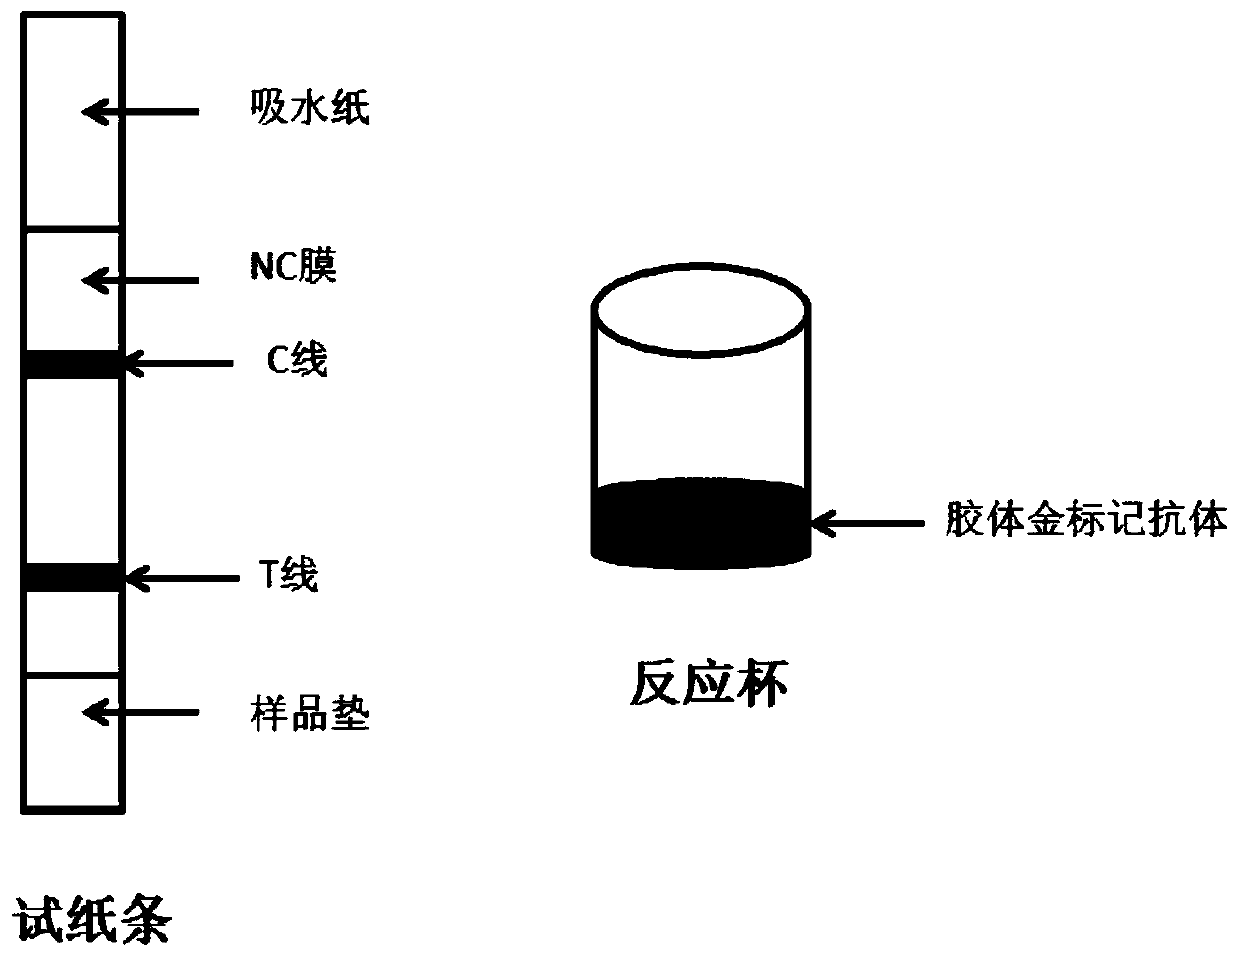 A colloidal gold rapid detection test device for pyrazolone antipyretic and analgesic drugs, its preparation method and application